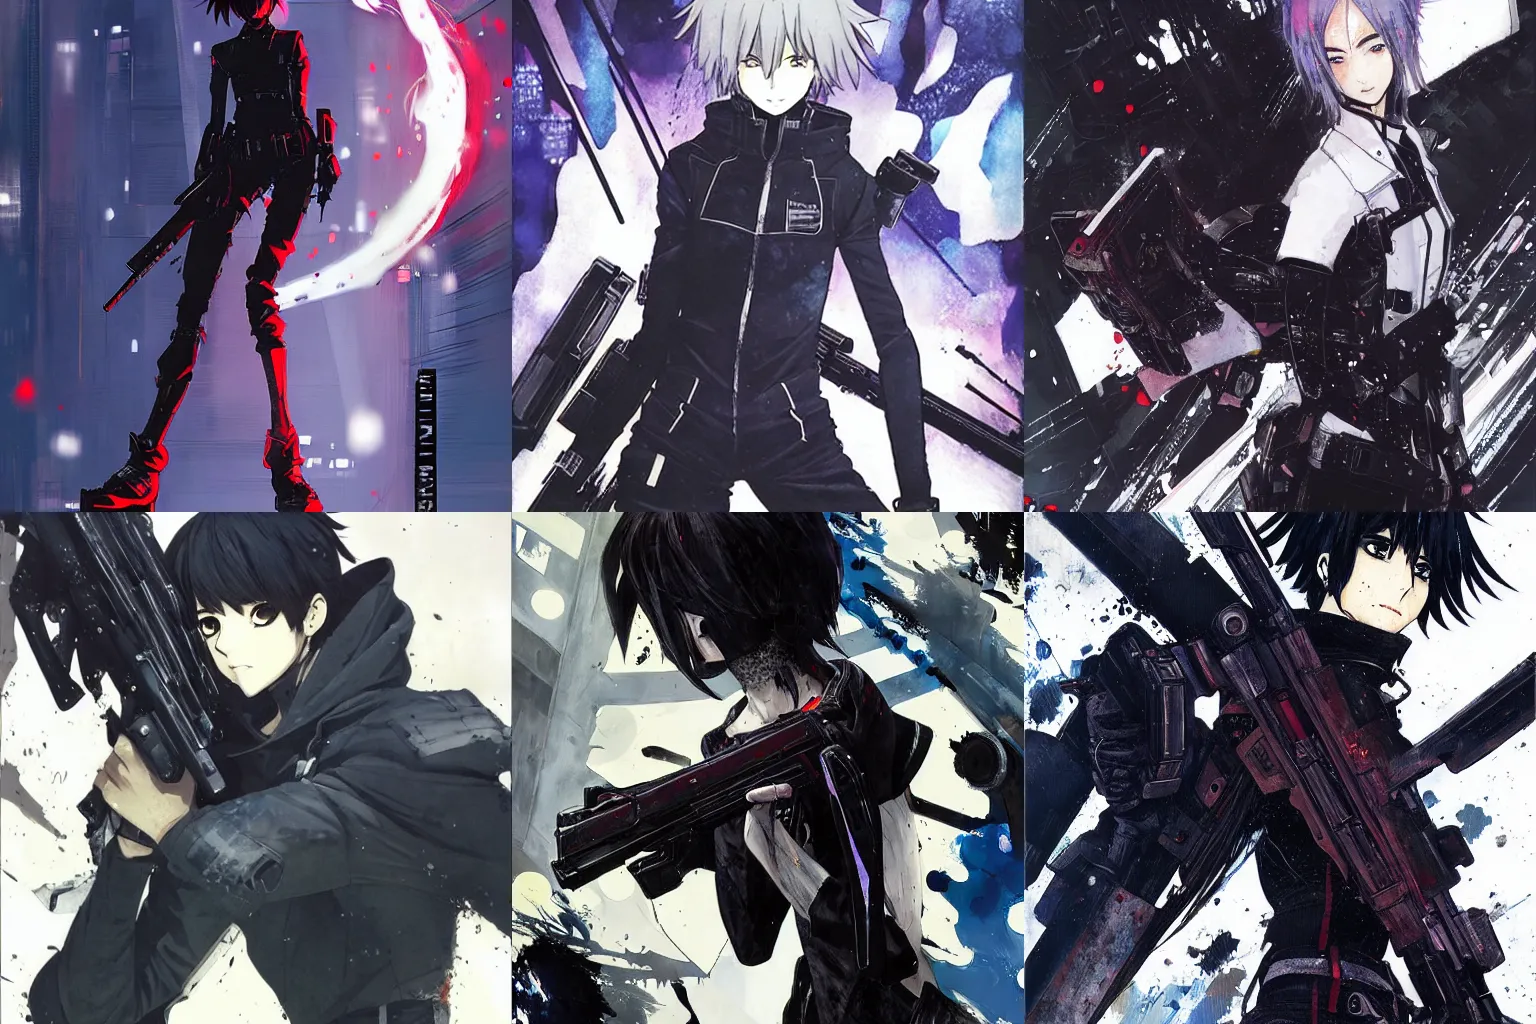 Netflix's 'BLAME!' Brings a Cyber Punk Vibe to an Anime Movie | Decider